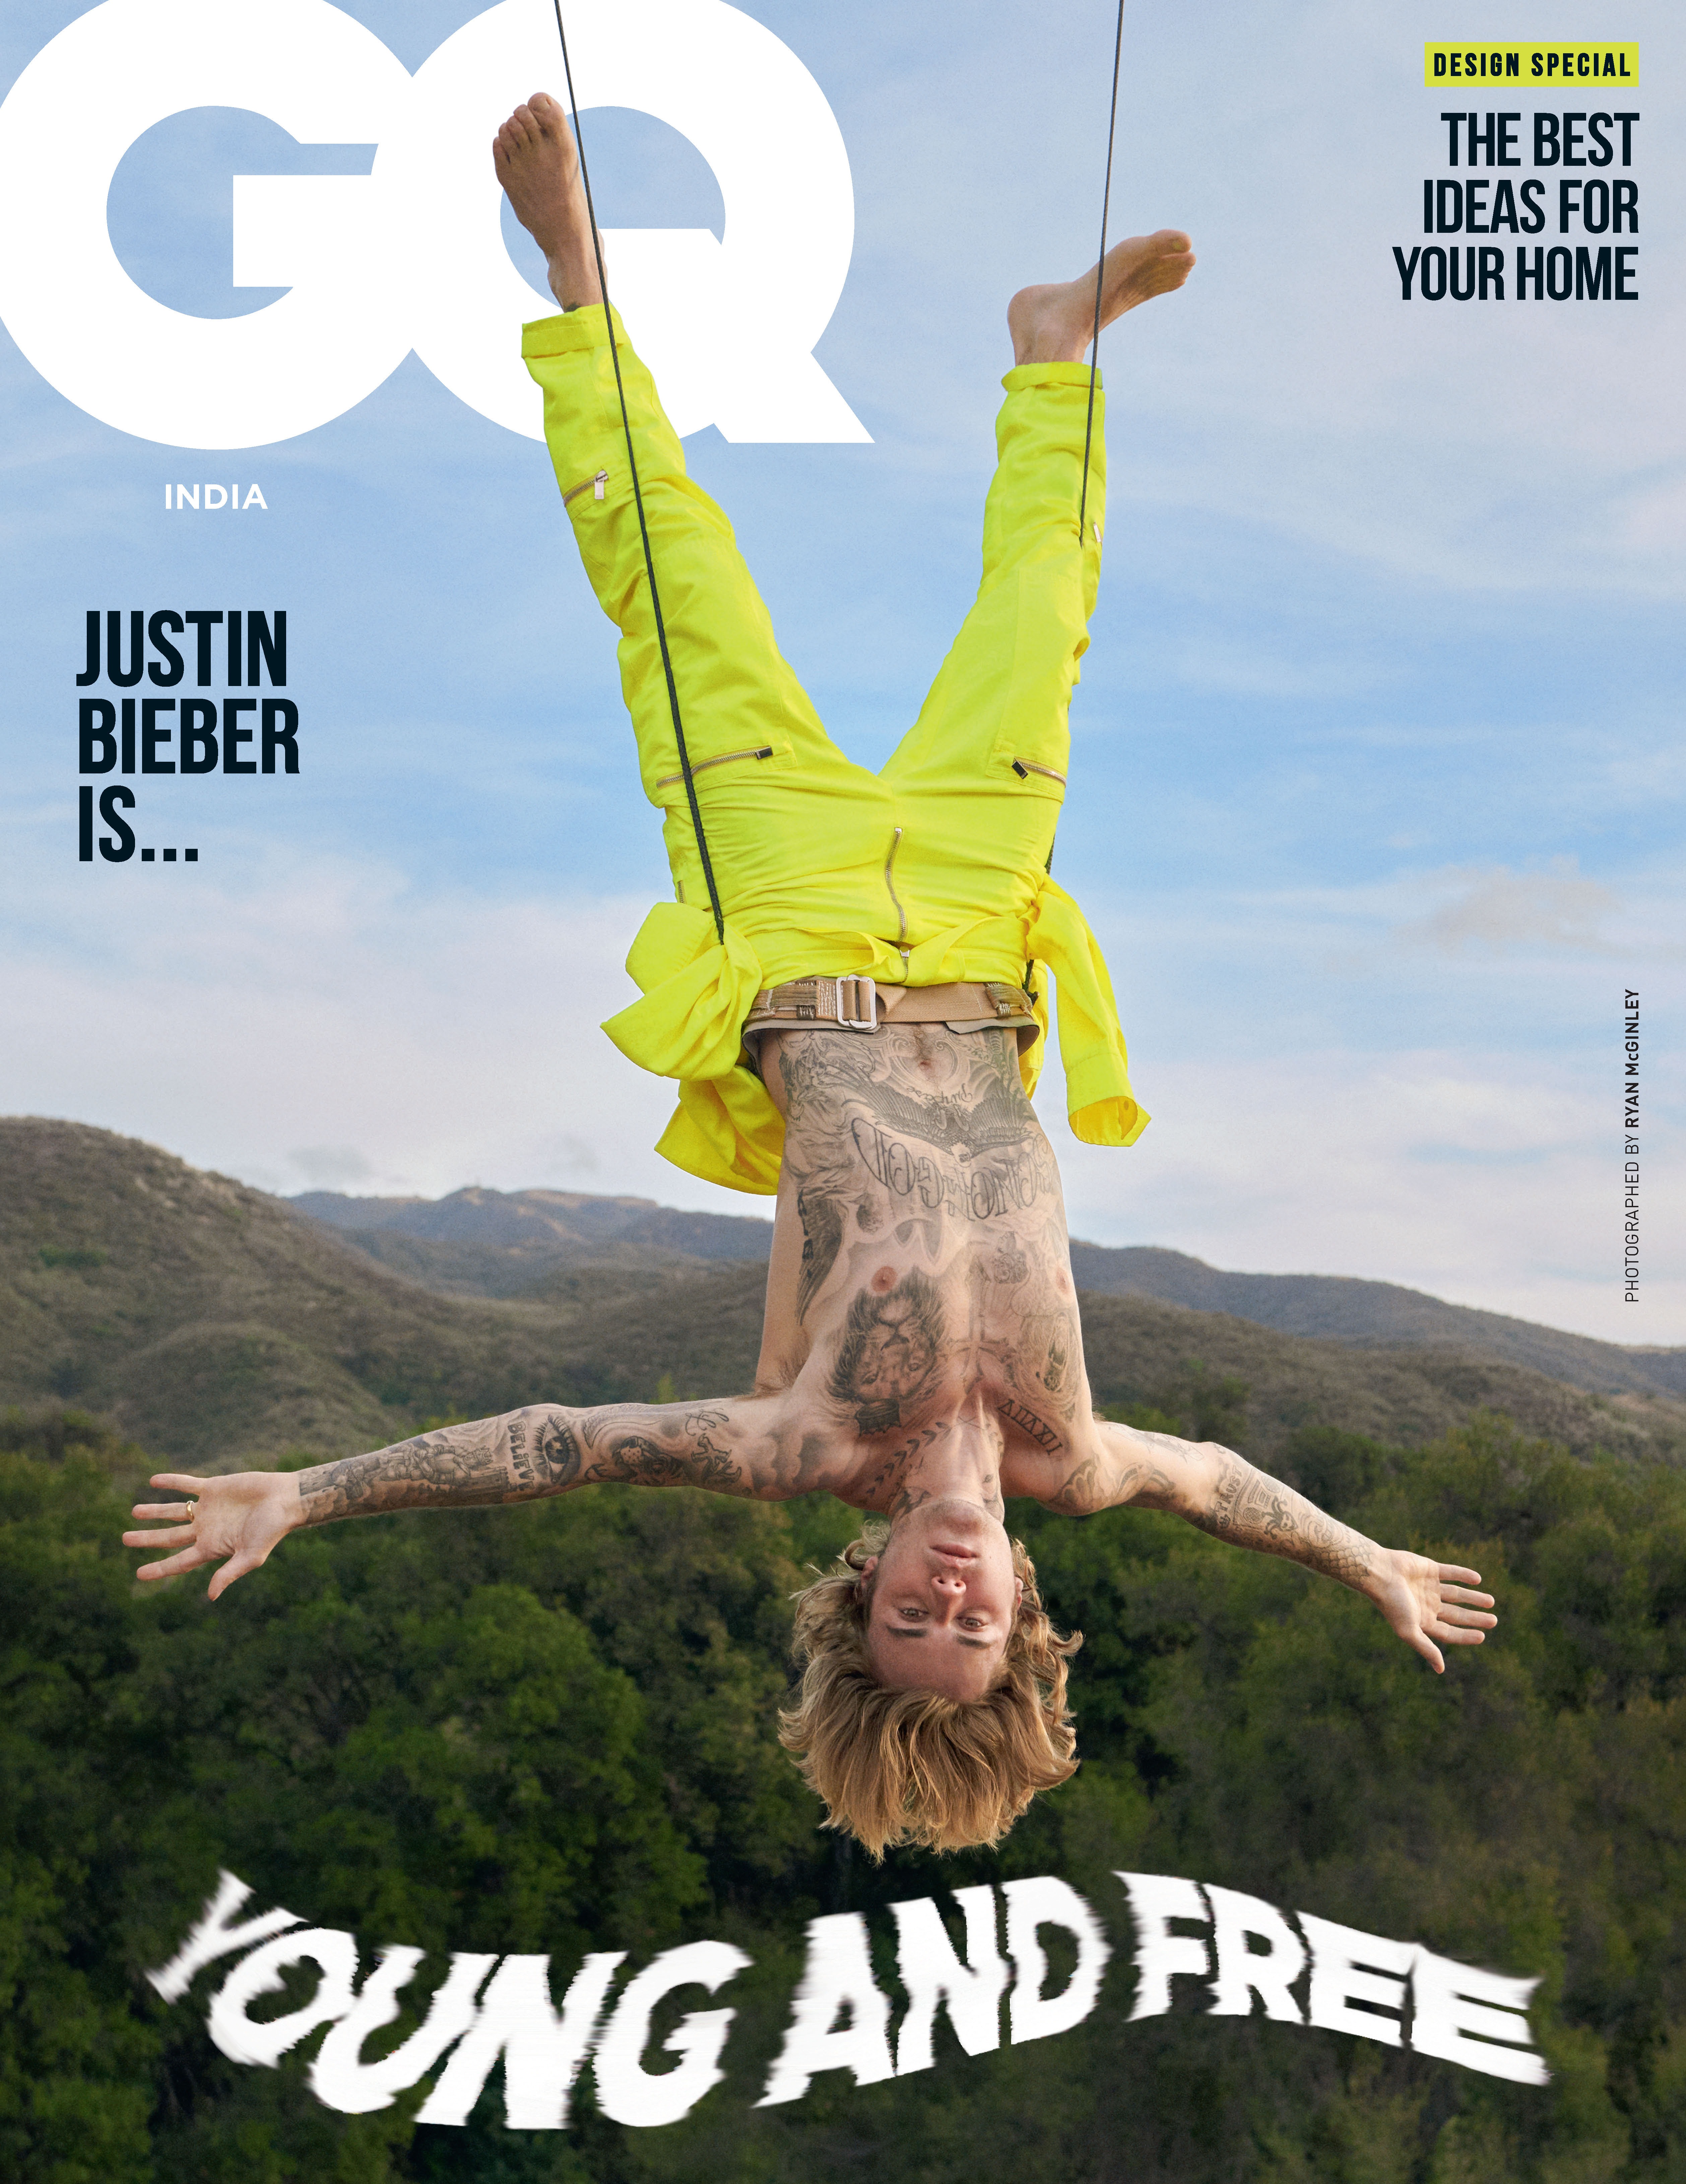 Justin Bieber is putting his life back together one positive, deliberate step at a time : GQ India decoding=